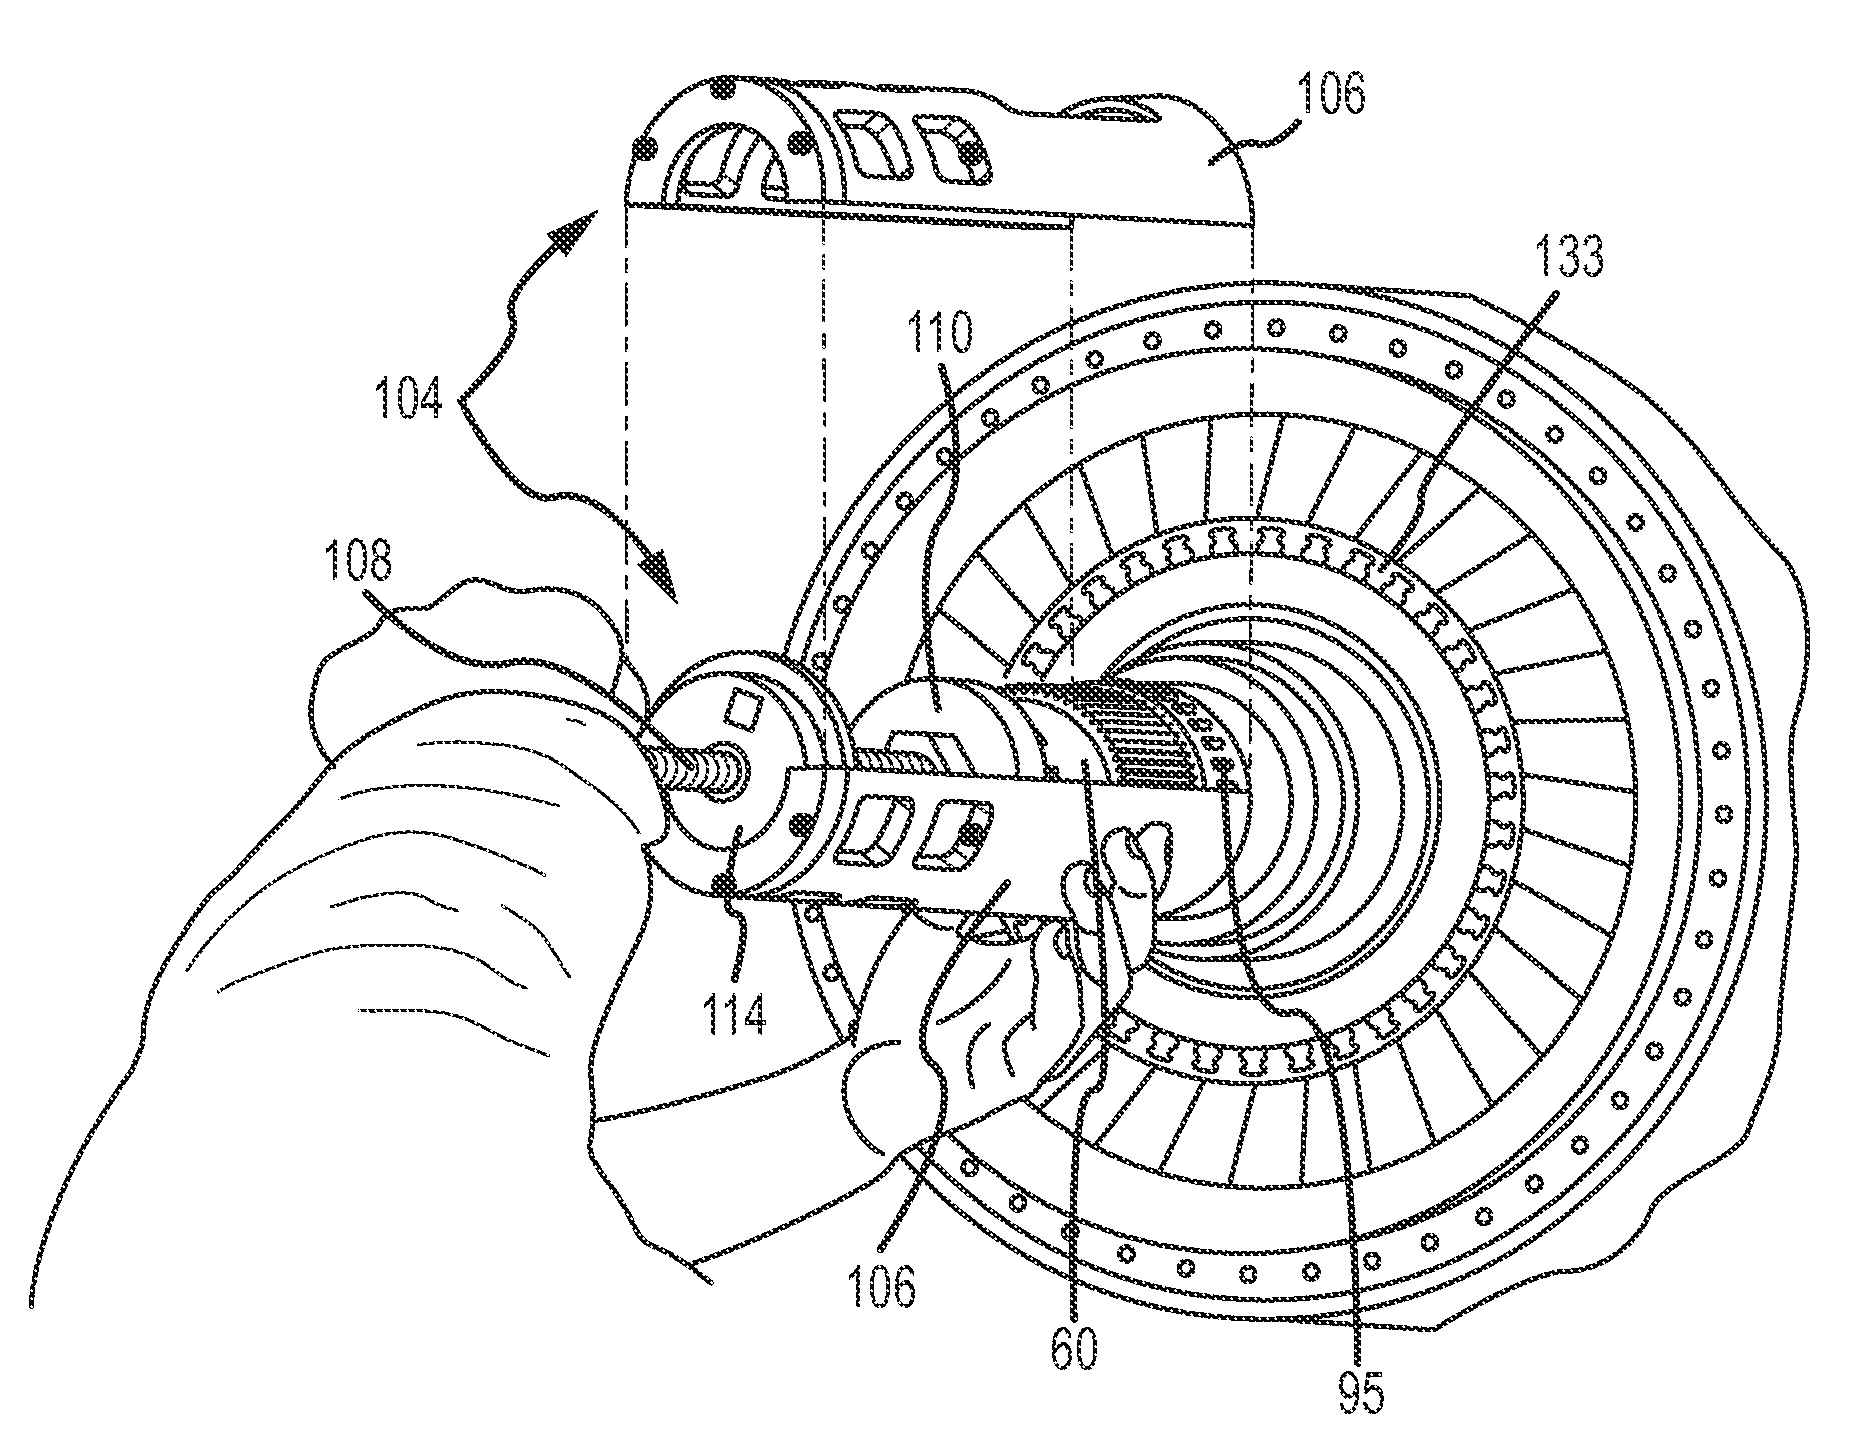 Method and Tooling for Partial Disassembly of a Bypass Turbofan Engine